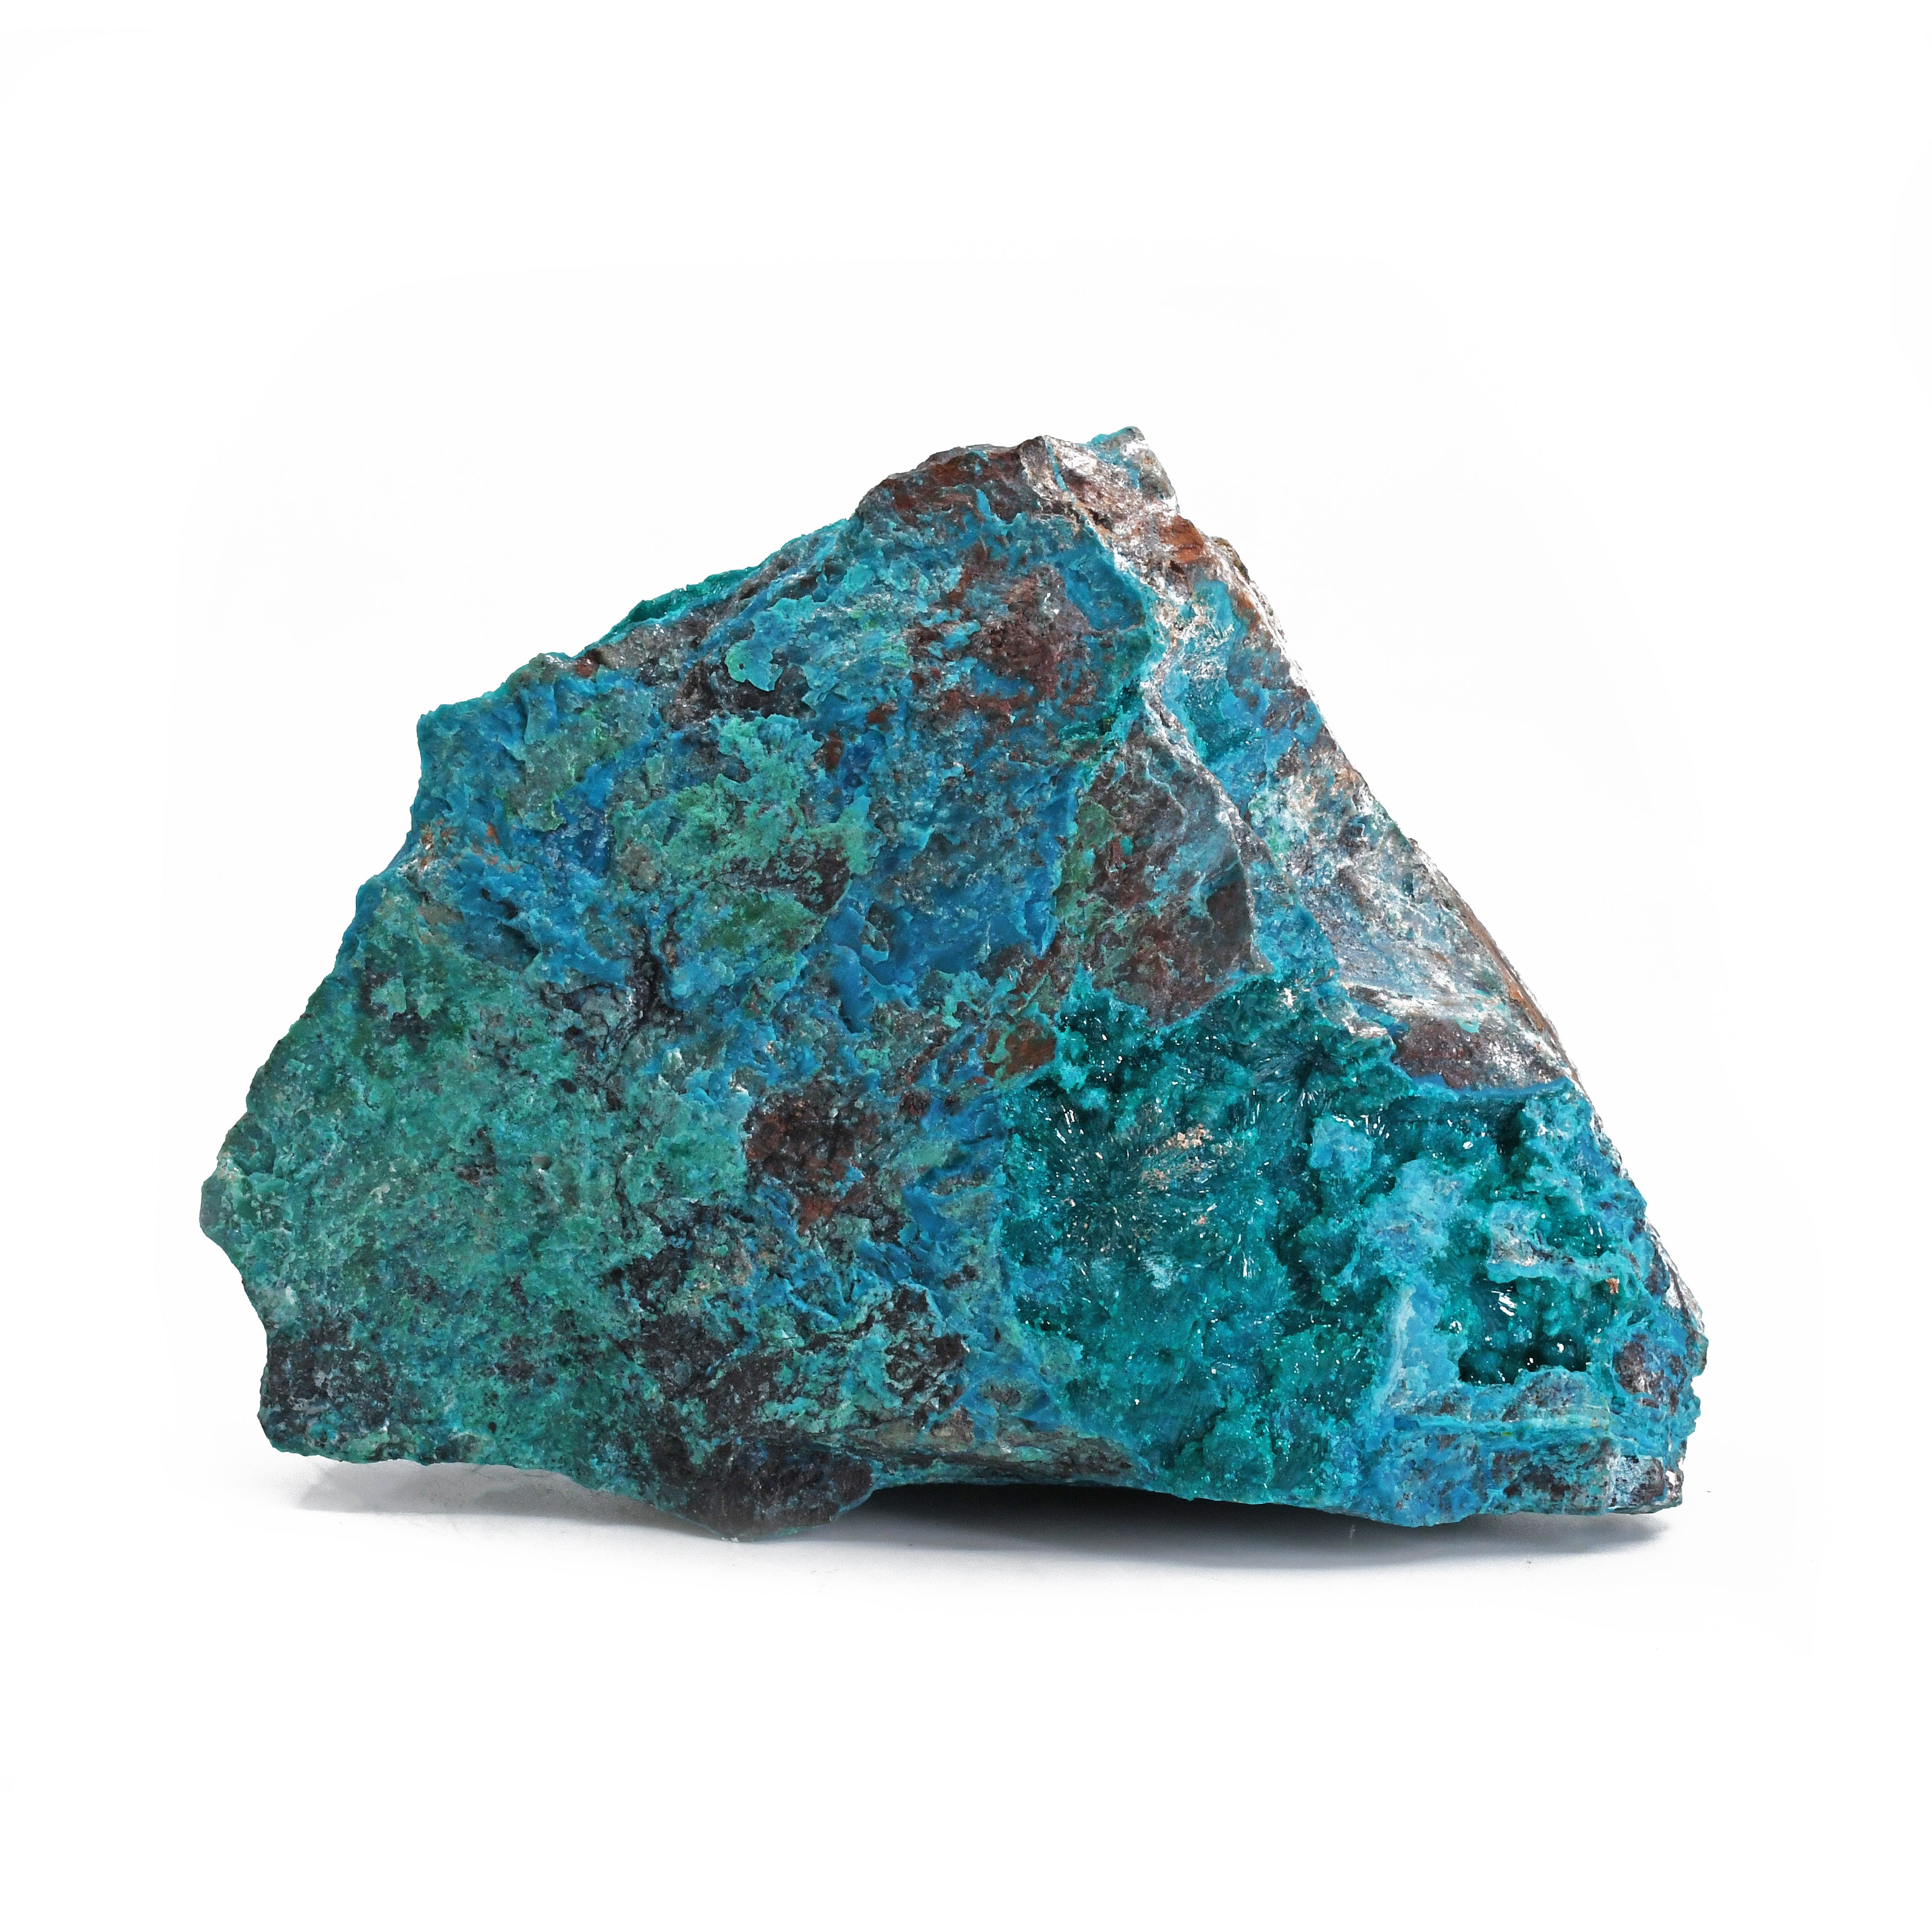 Dioptase and Shattuckite 4.18 inch 420 grams with Quartz Natural Crystal Cluster - Mexico - HHX-091 - Crystalarium